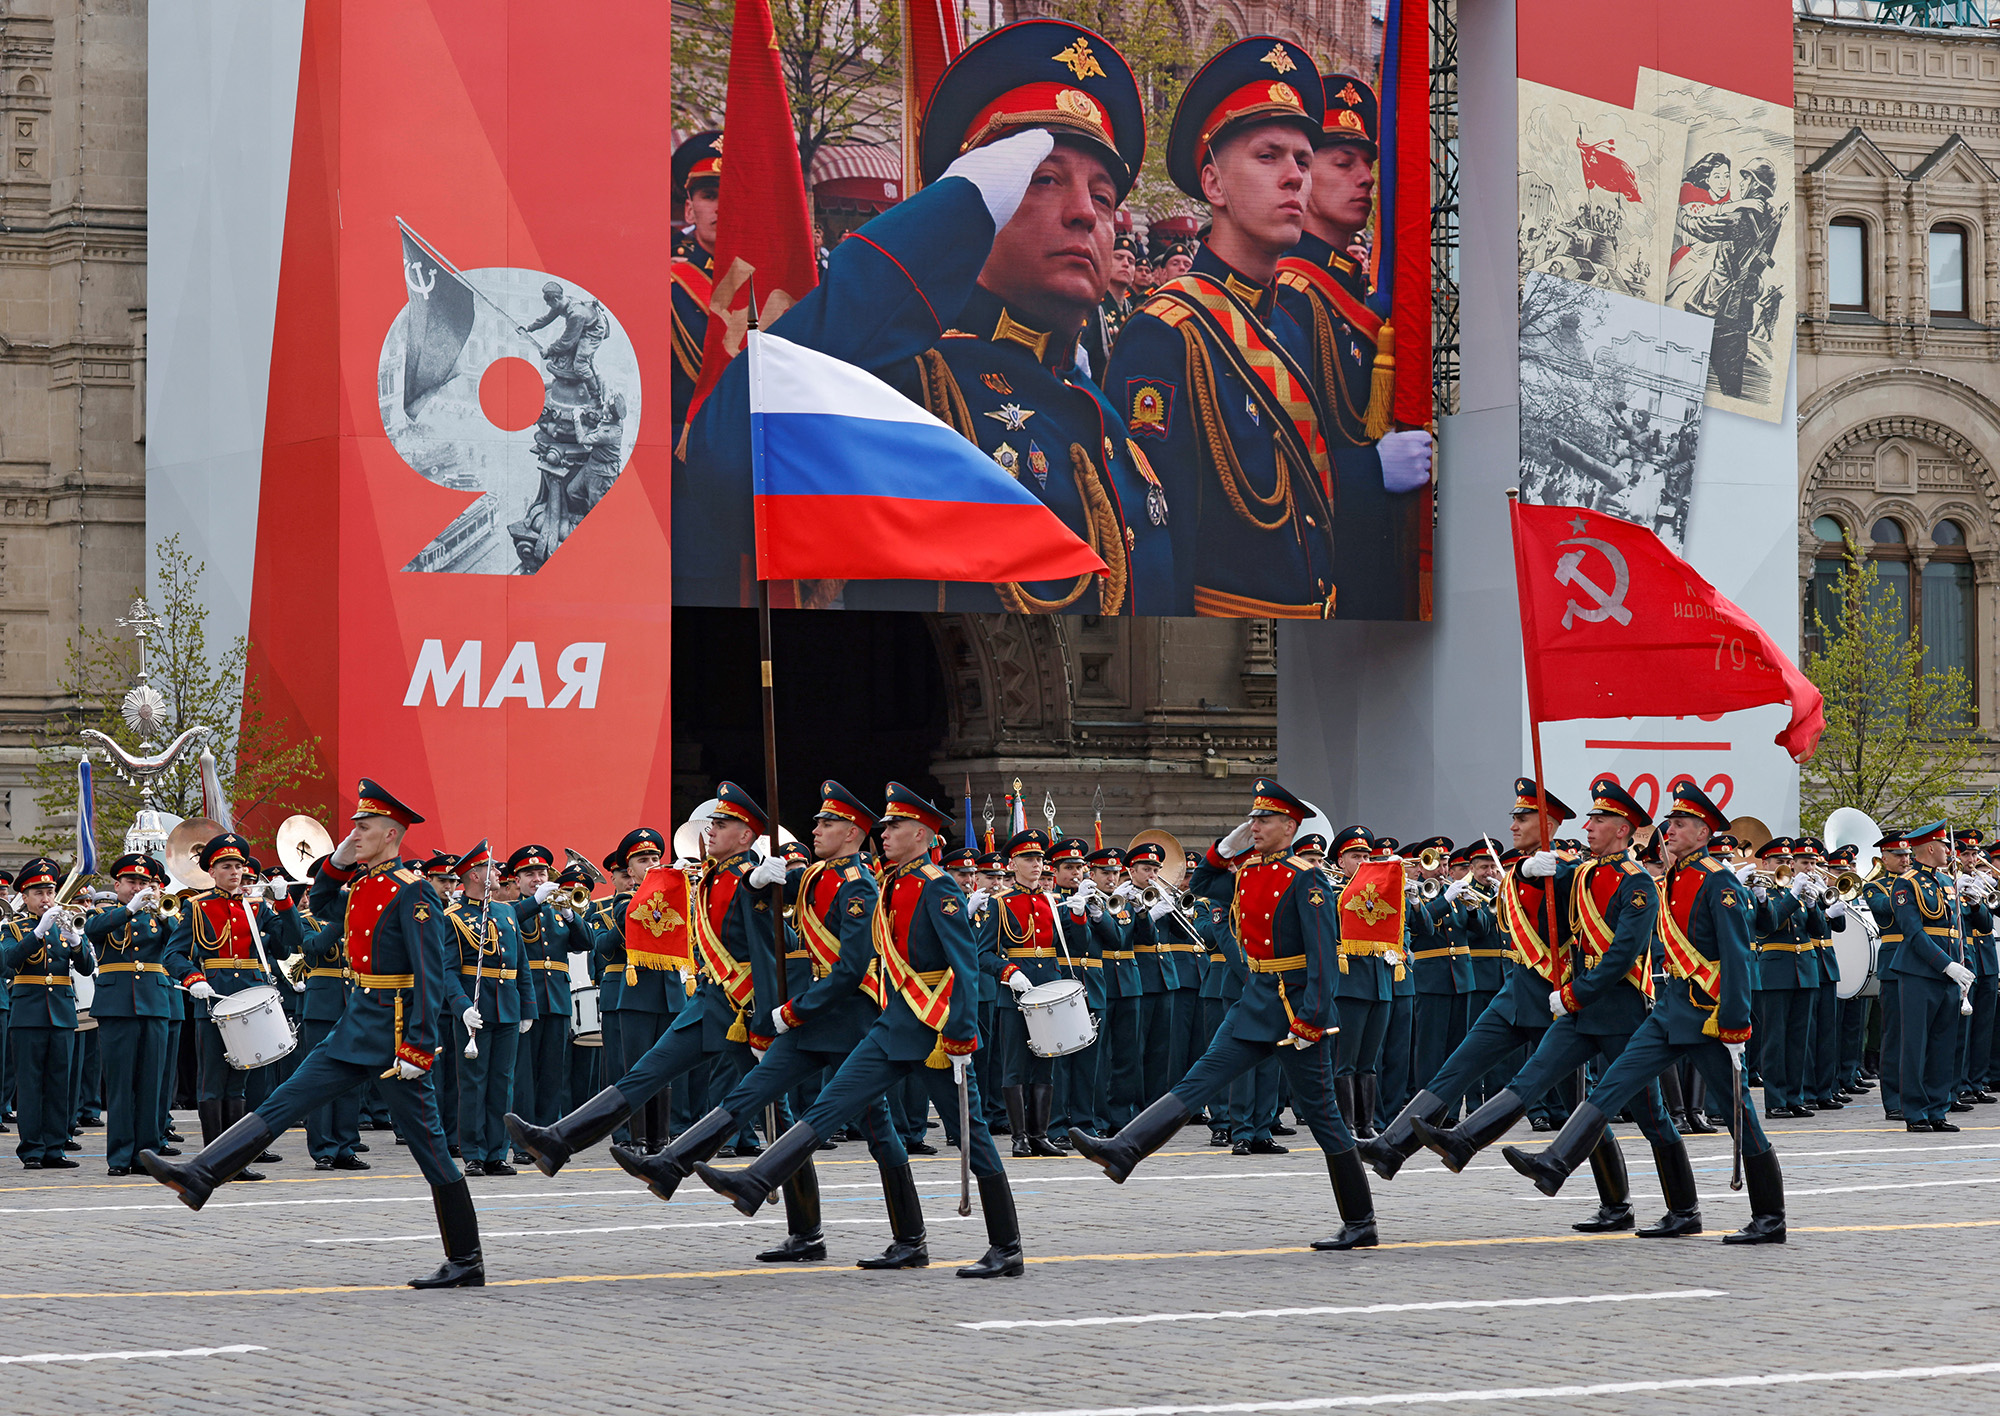 Russian service members take part in a military parade on Victory Day, which marks the 77th anniversary of the victory over Nazi Germany in World War Two, in Red Square in central Moscow, Russia, on May 9.